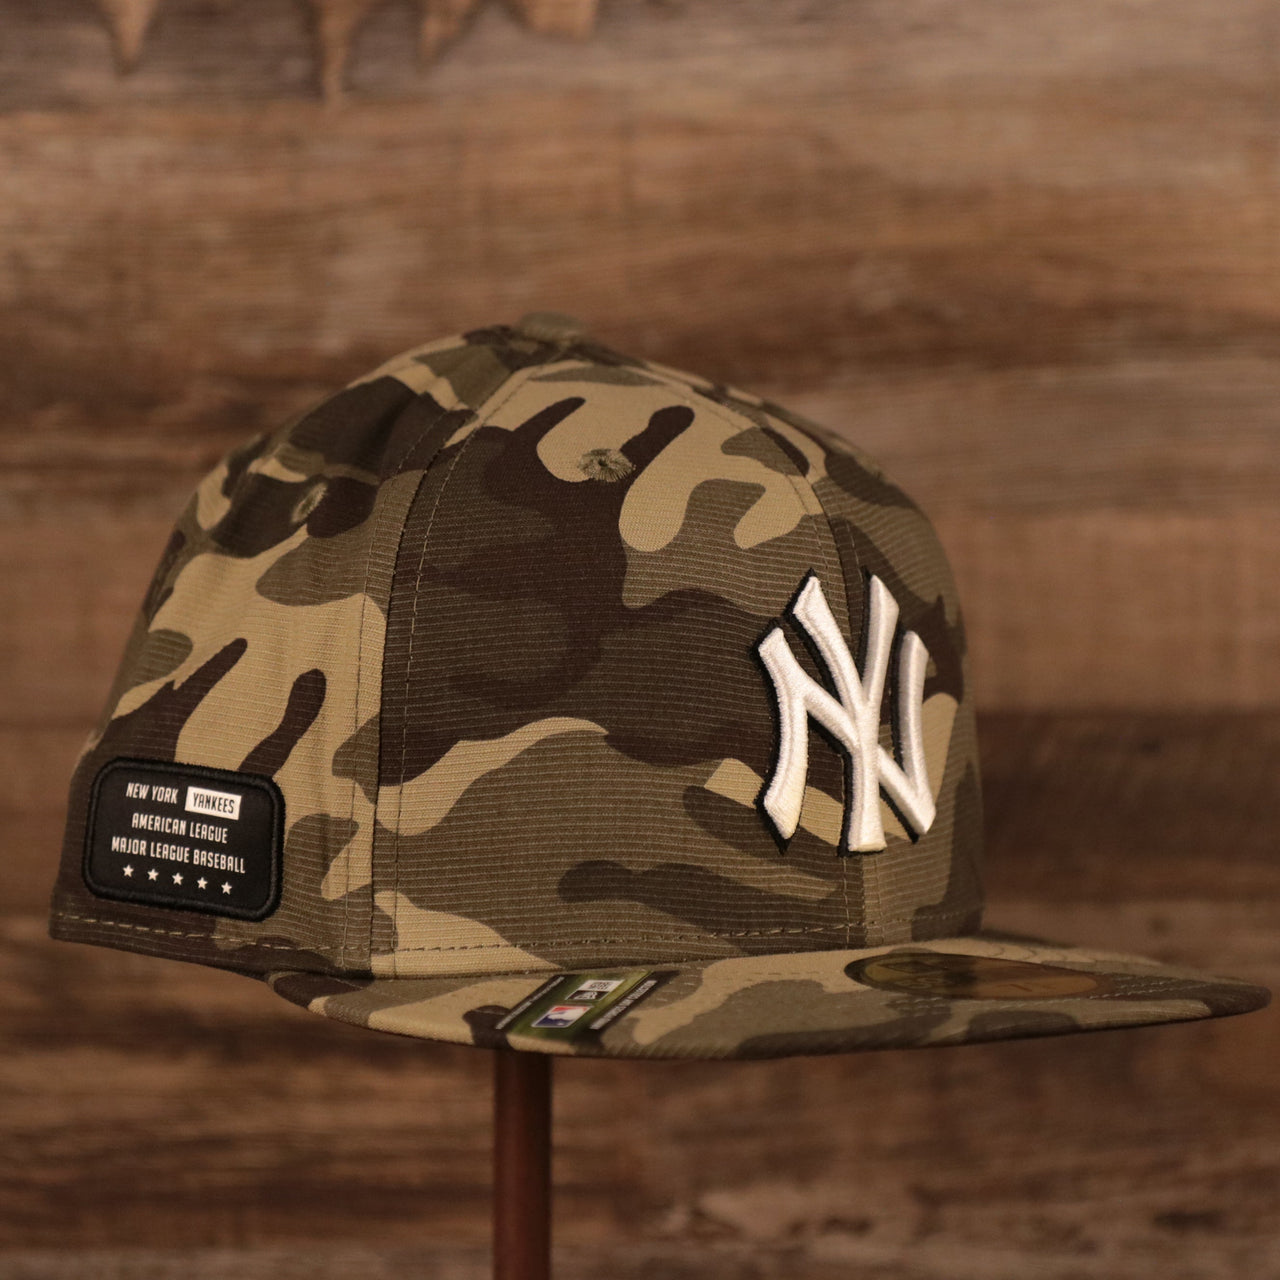 The New York Yankees Memorial Day hat 2021 by New Era.